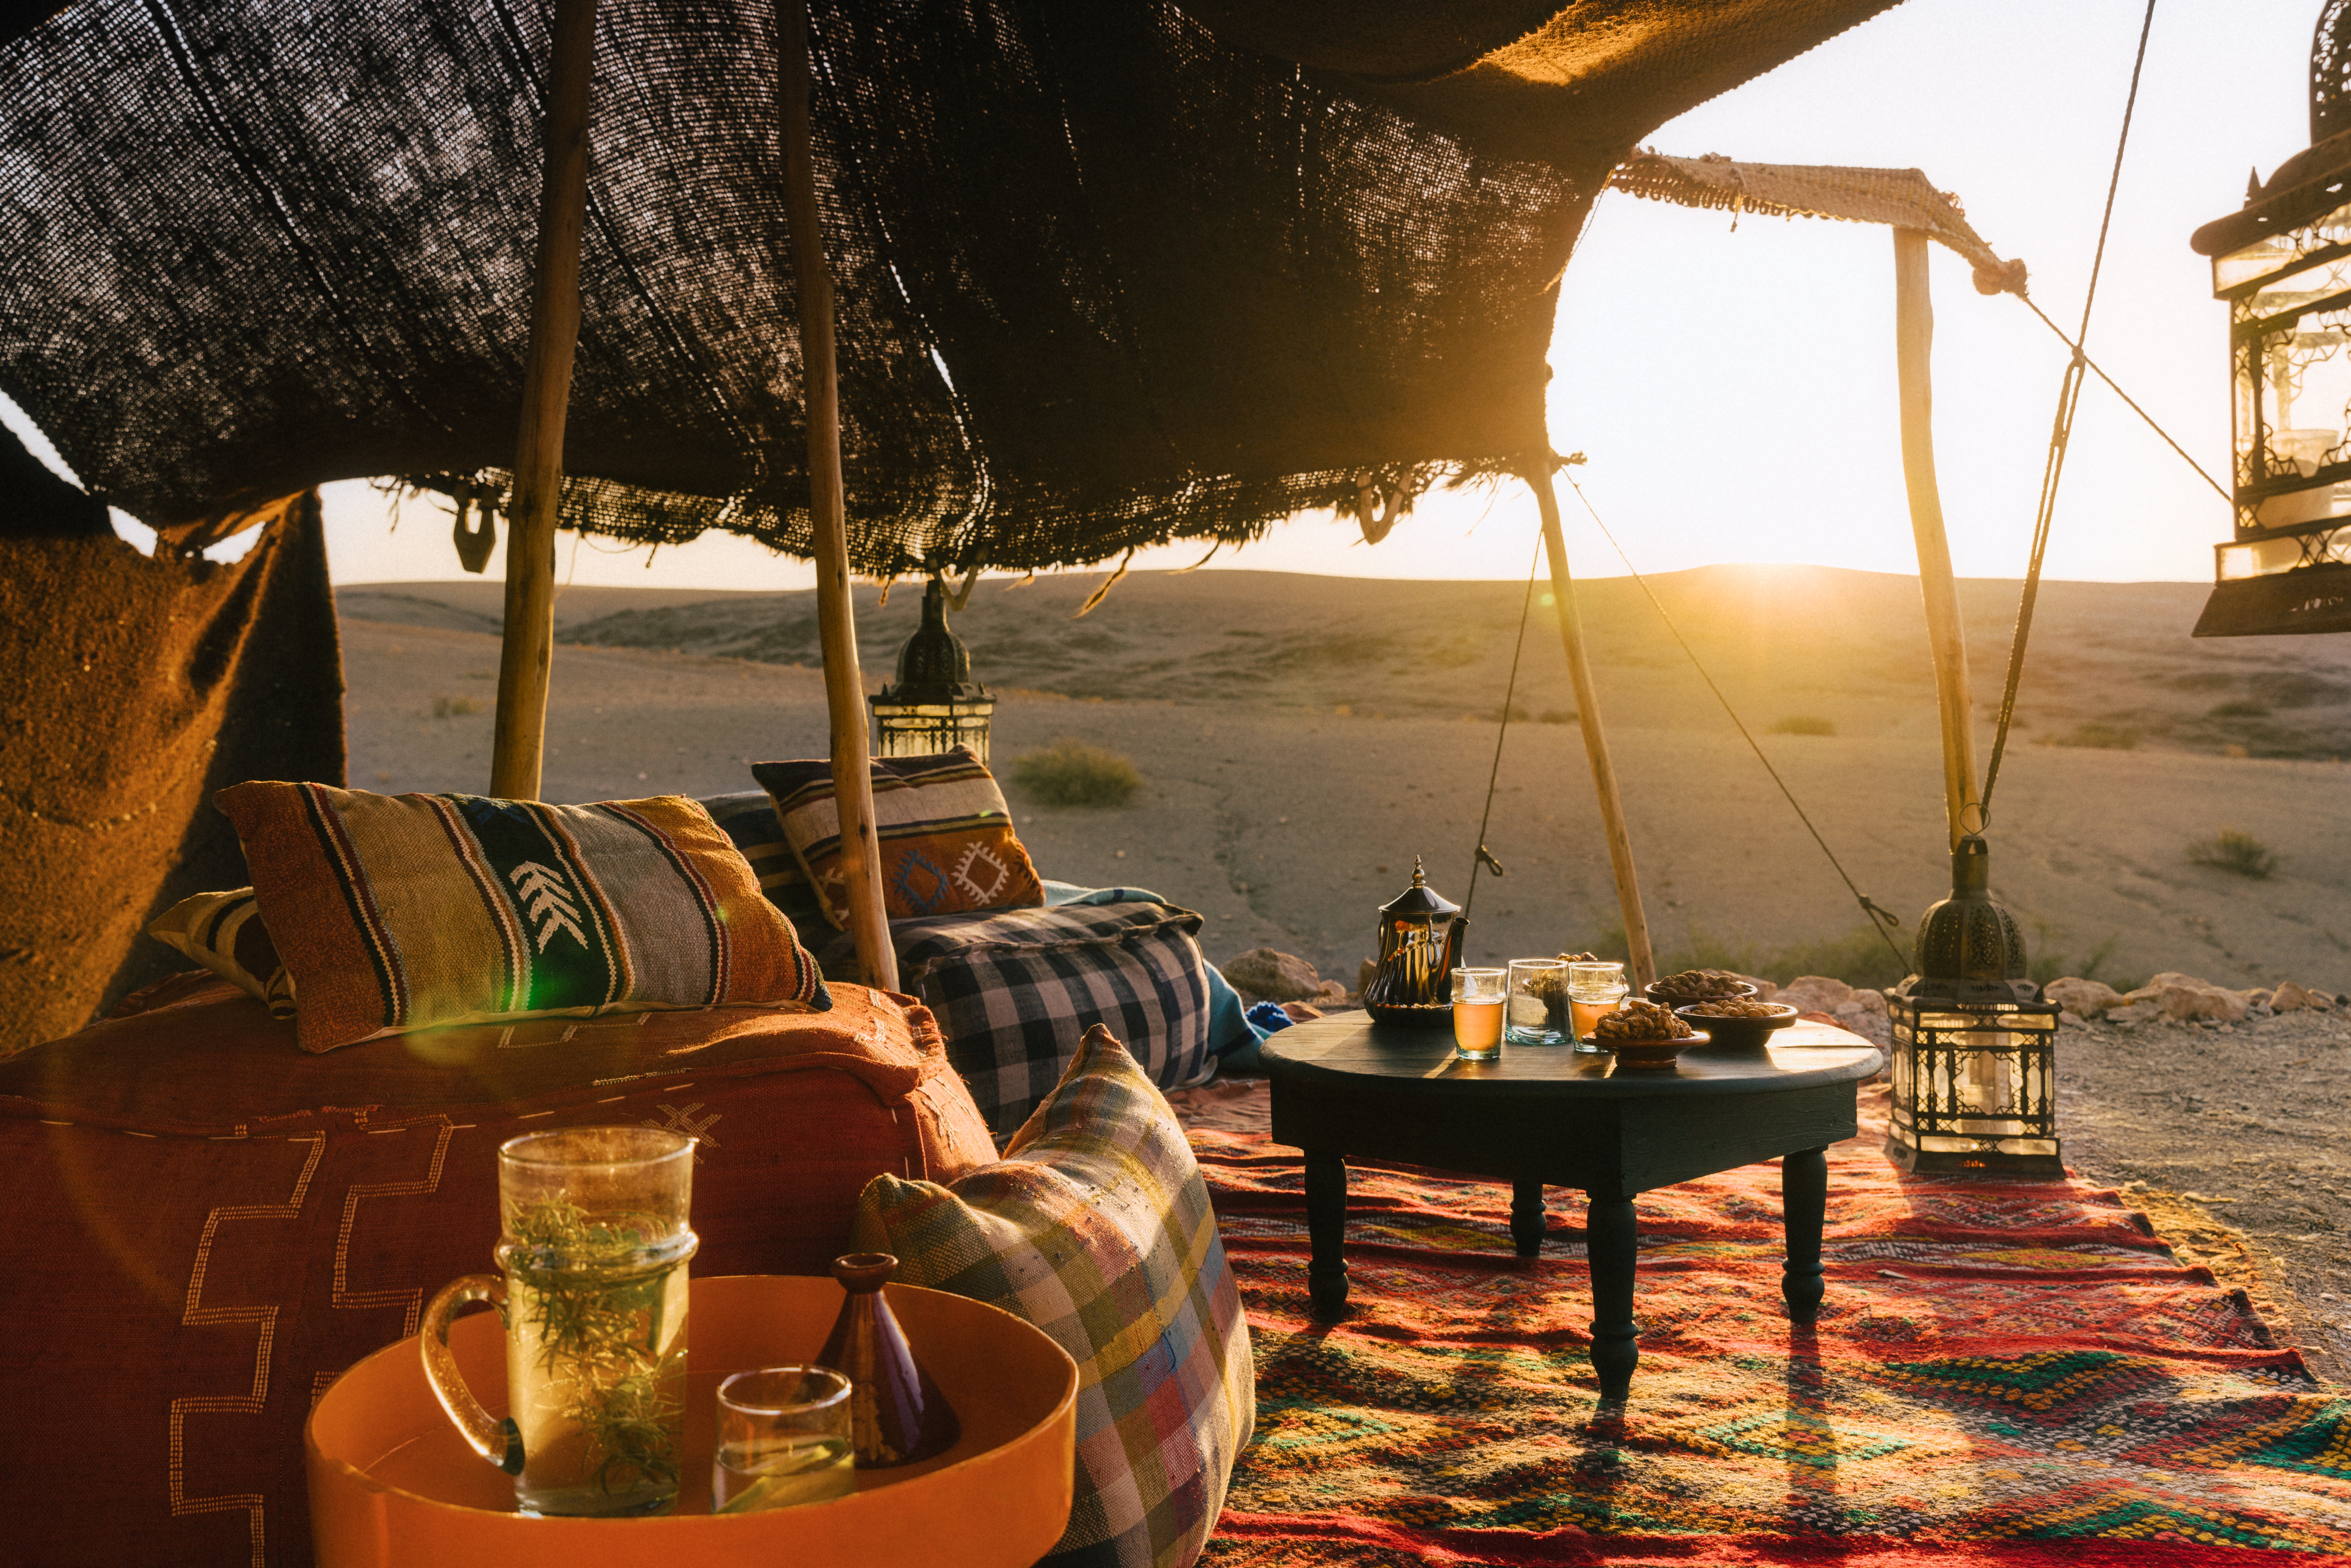 Berber-style lounge tents are great for watching the sunset